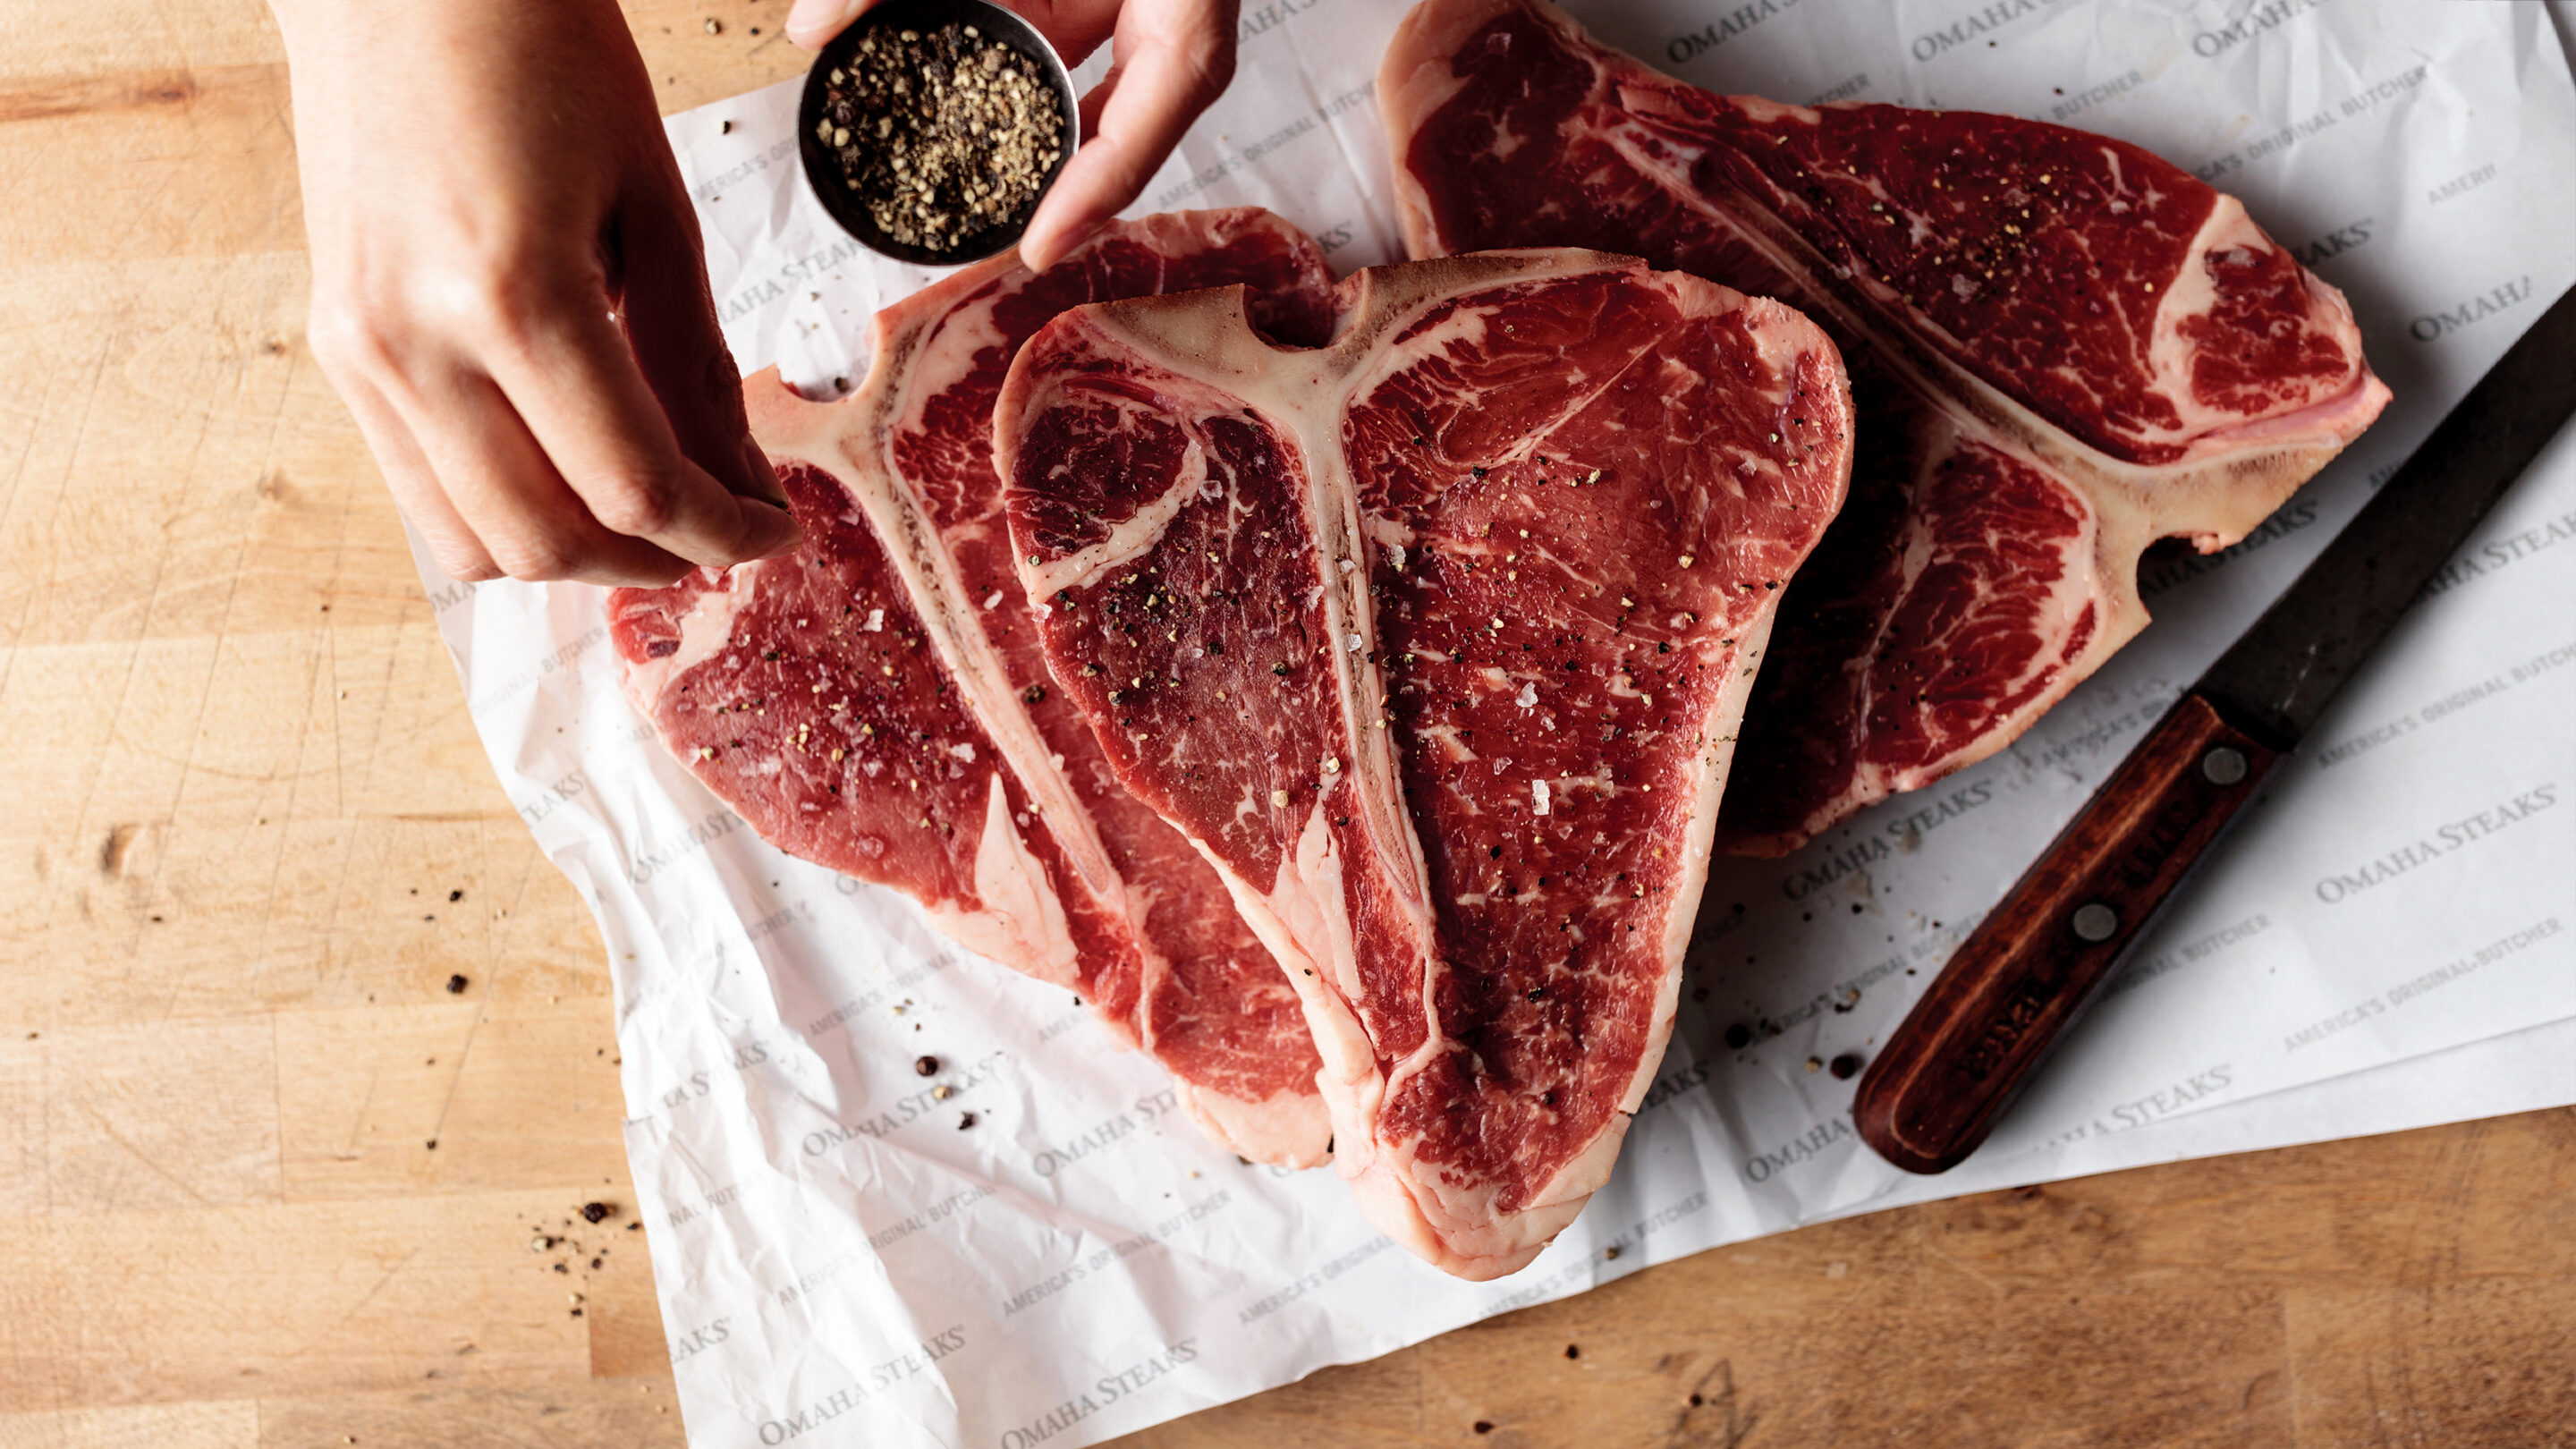 The Butcher's Guide: What is a T-bone? | Omaha Steaks